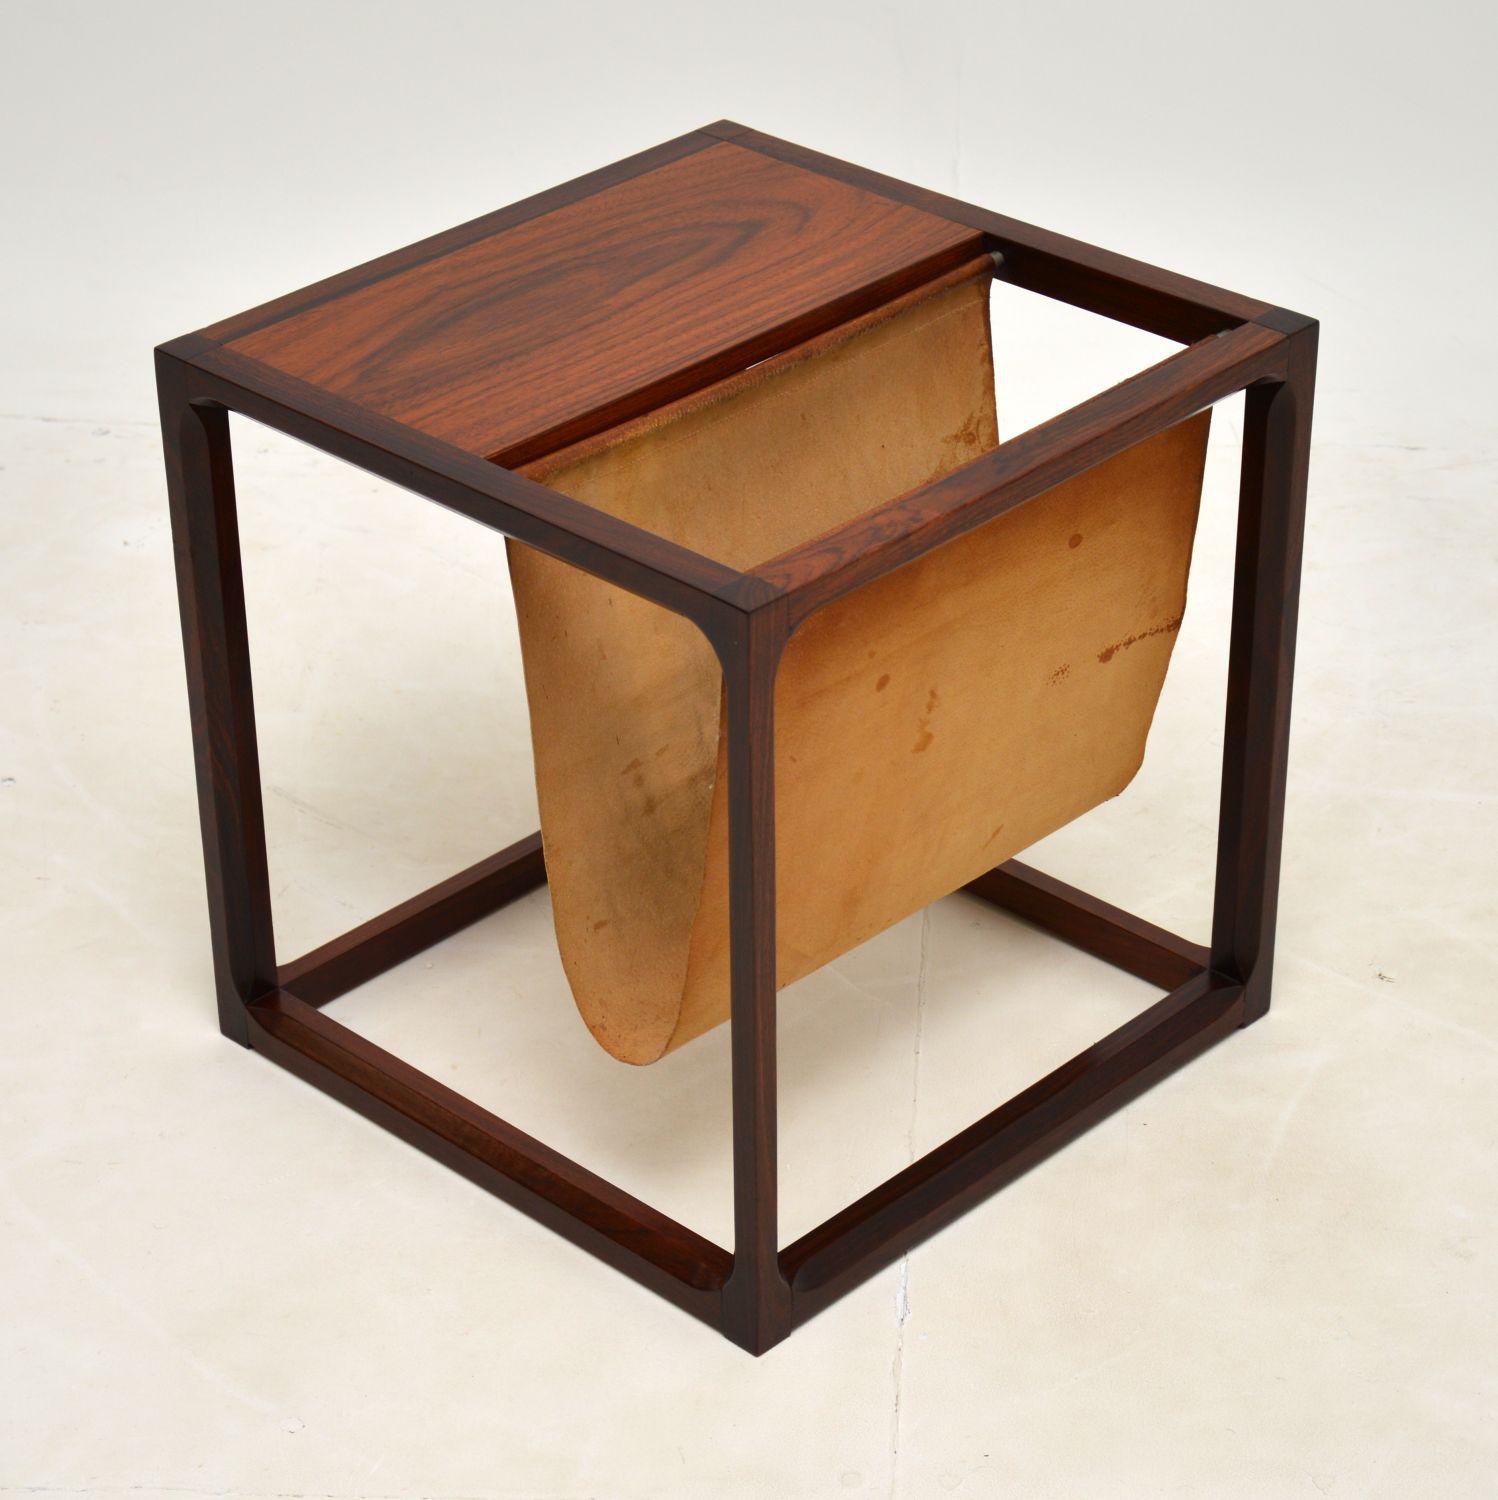 A stunning vintage Danish side table / magazine rack in wood and leather. This was made by Aksel Kjersgaard, and was designed by Kai Kristiansen. It was made in Denmark, and dates from the 1960’s.

This is a gorgeous and very useful item, it is